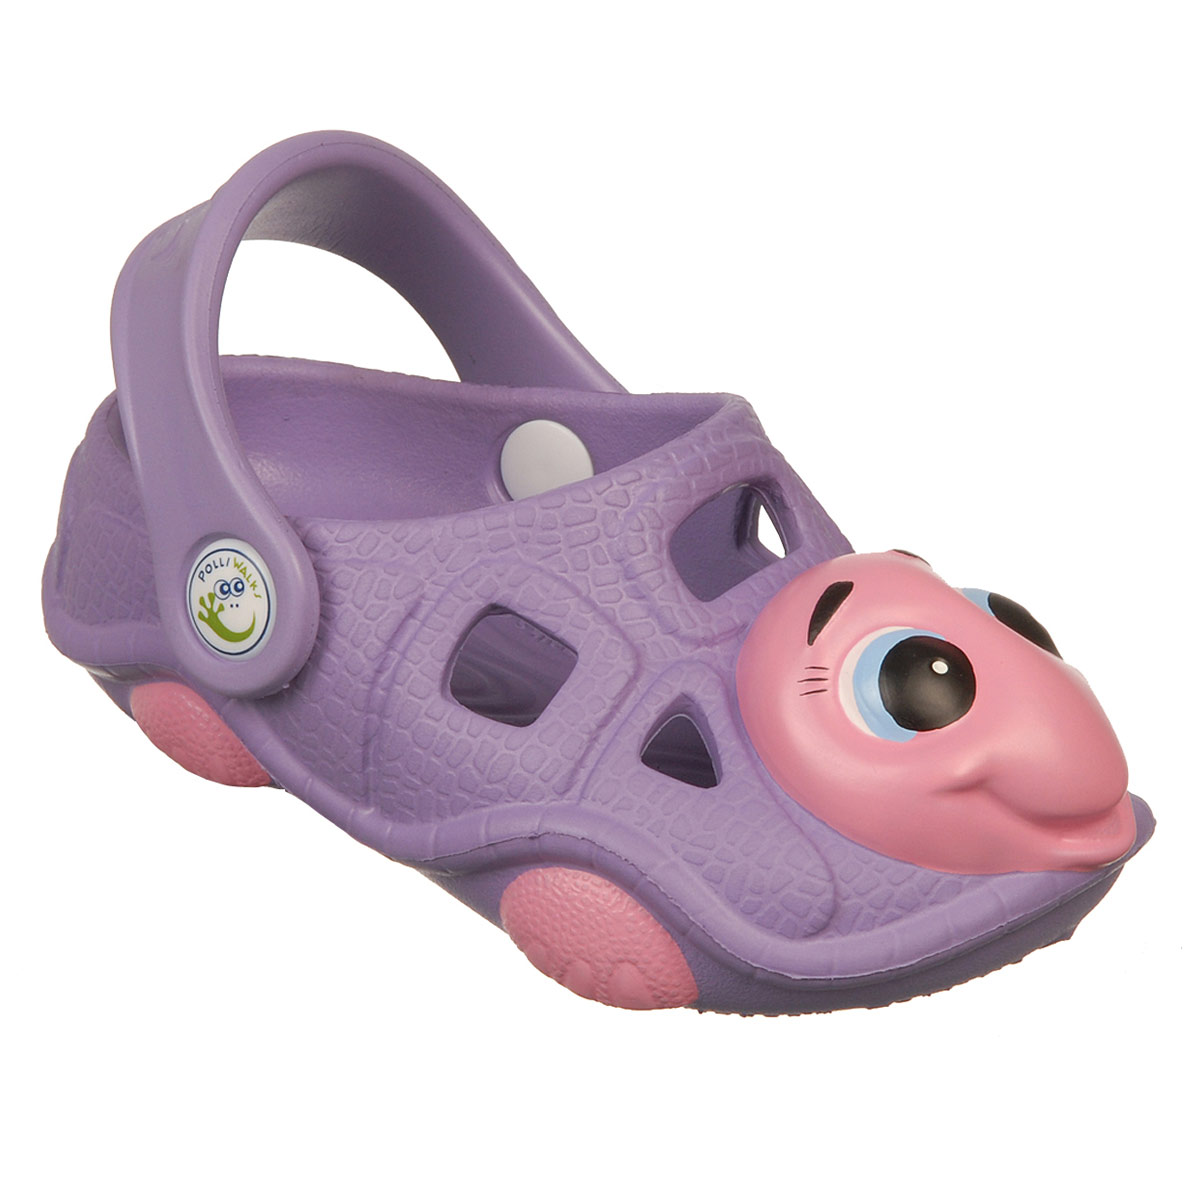 Polliwalks : Toddler shoes Tory  the Turtle  Purple # 8